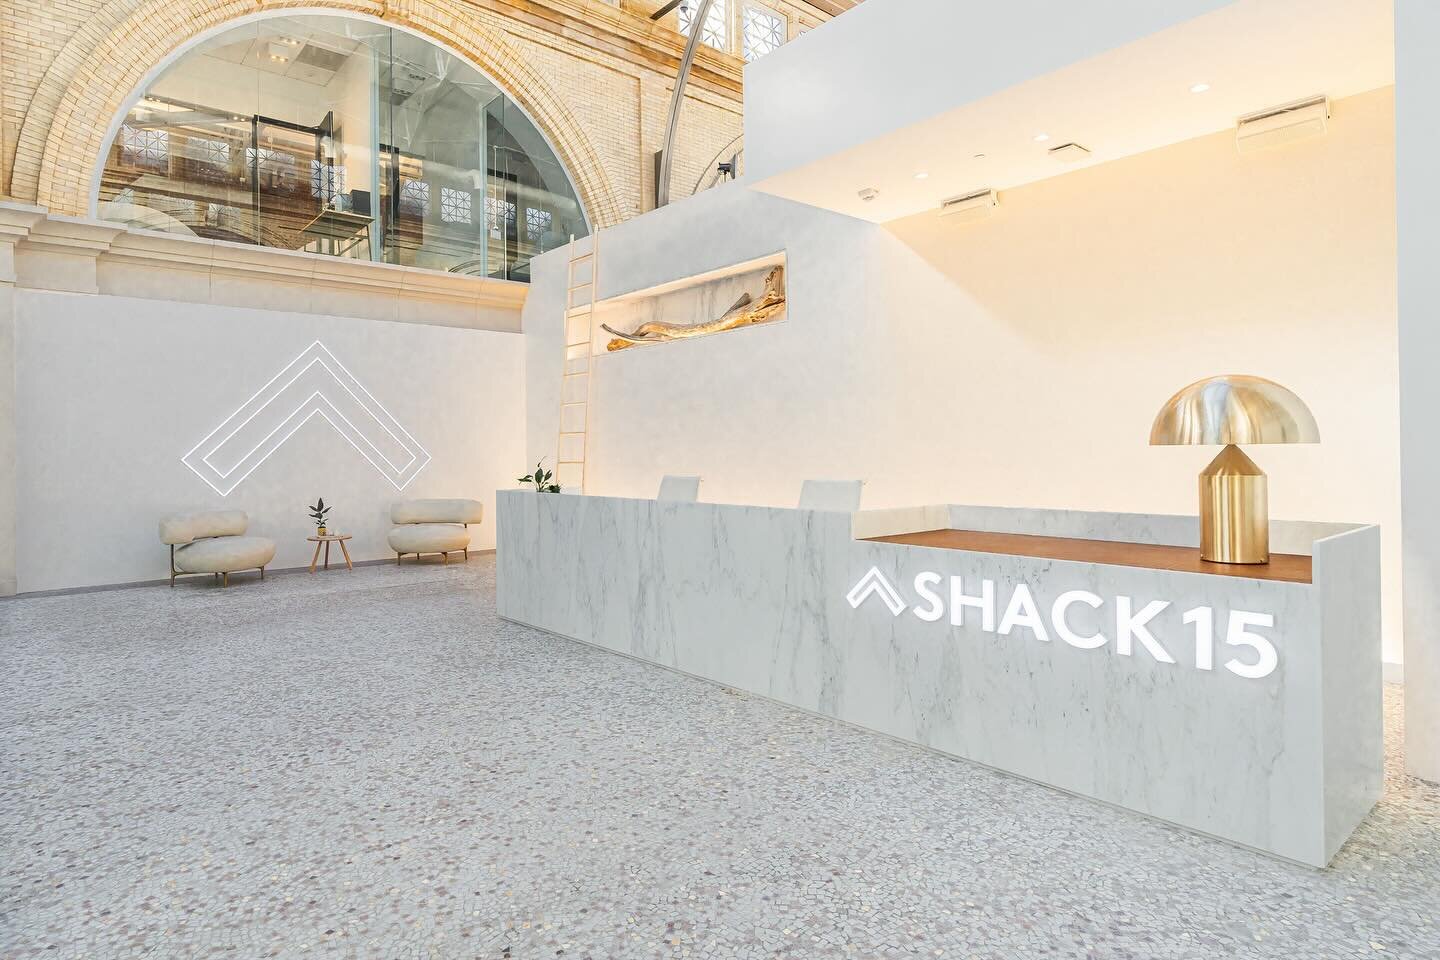 Don&rsquo;t miss out on early bird tickets to this month&rsquo;s Happy Hour and Networking (ends tonight)! ✨ Join us on Thursday, March 28 for networking with a view at the beautiful SHACK15 on the top floor of the Ferry Building along the Embarcader